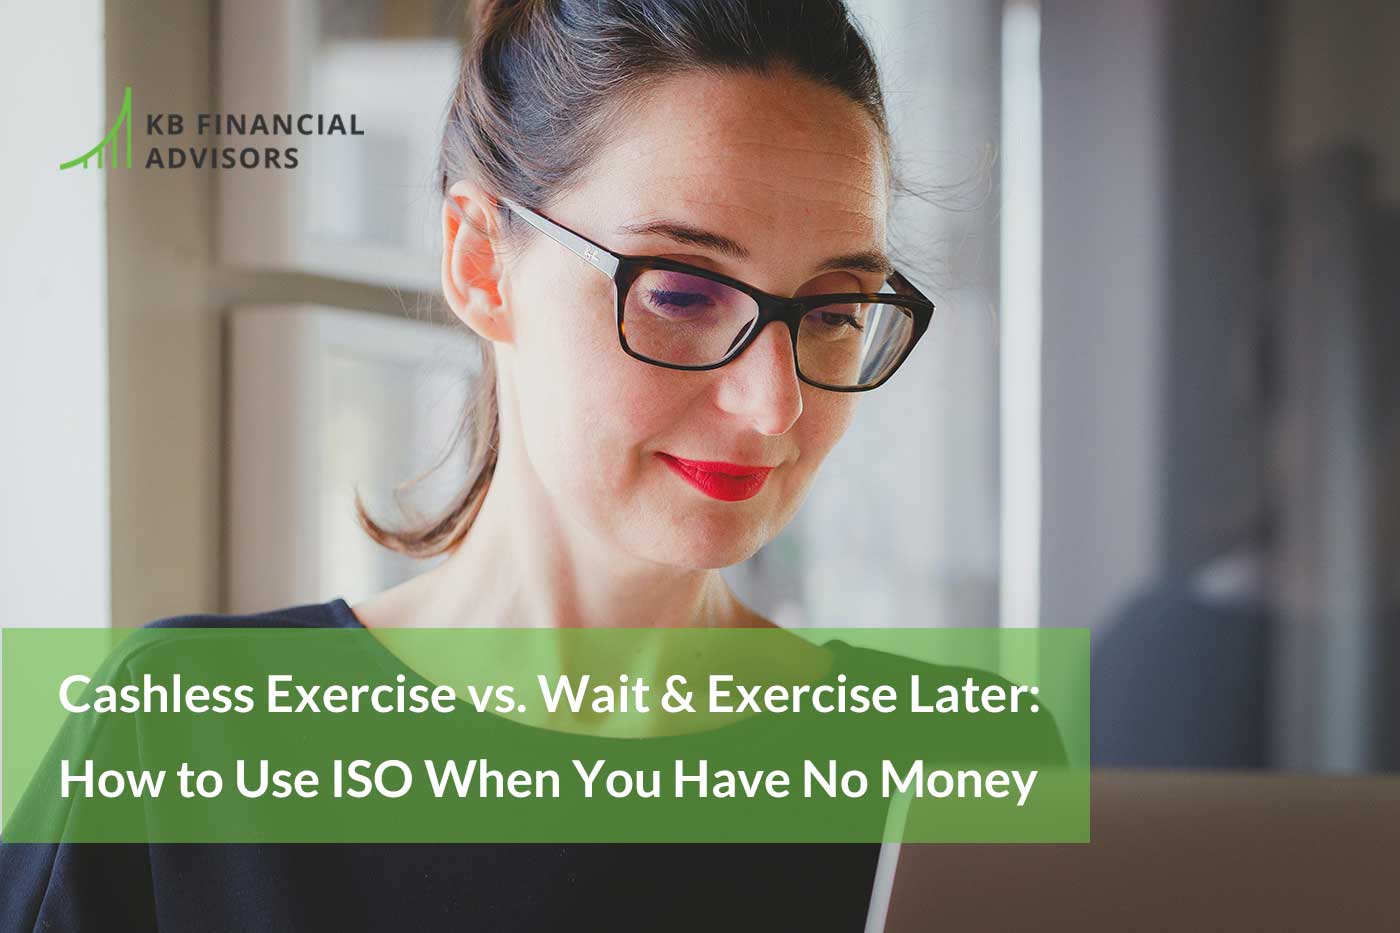 Cashless Exercise vs. Wait & Exercise Later: How to Use ISO When You Have No Money